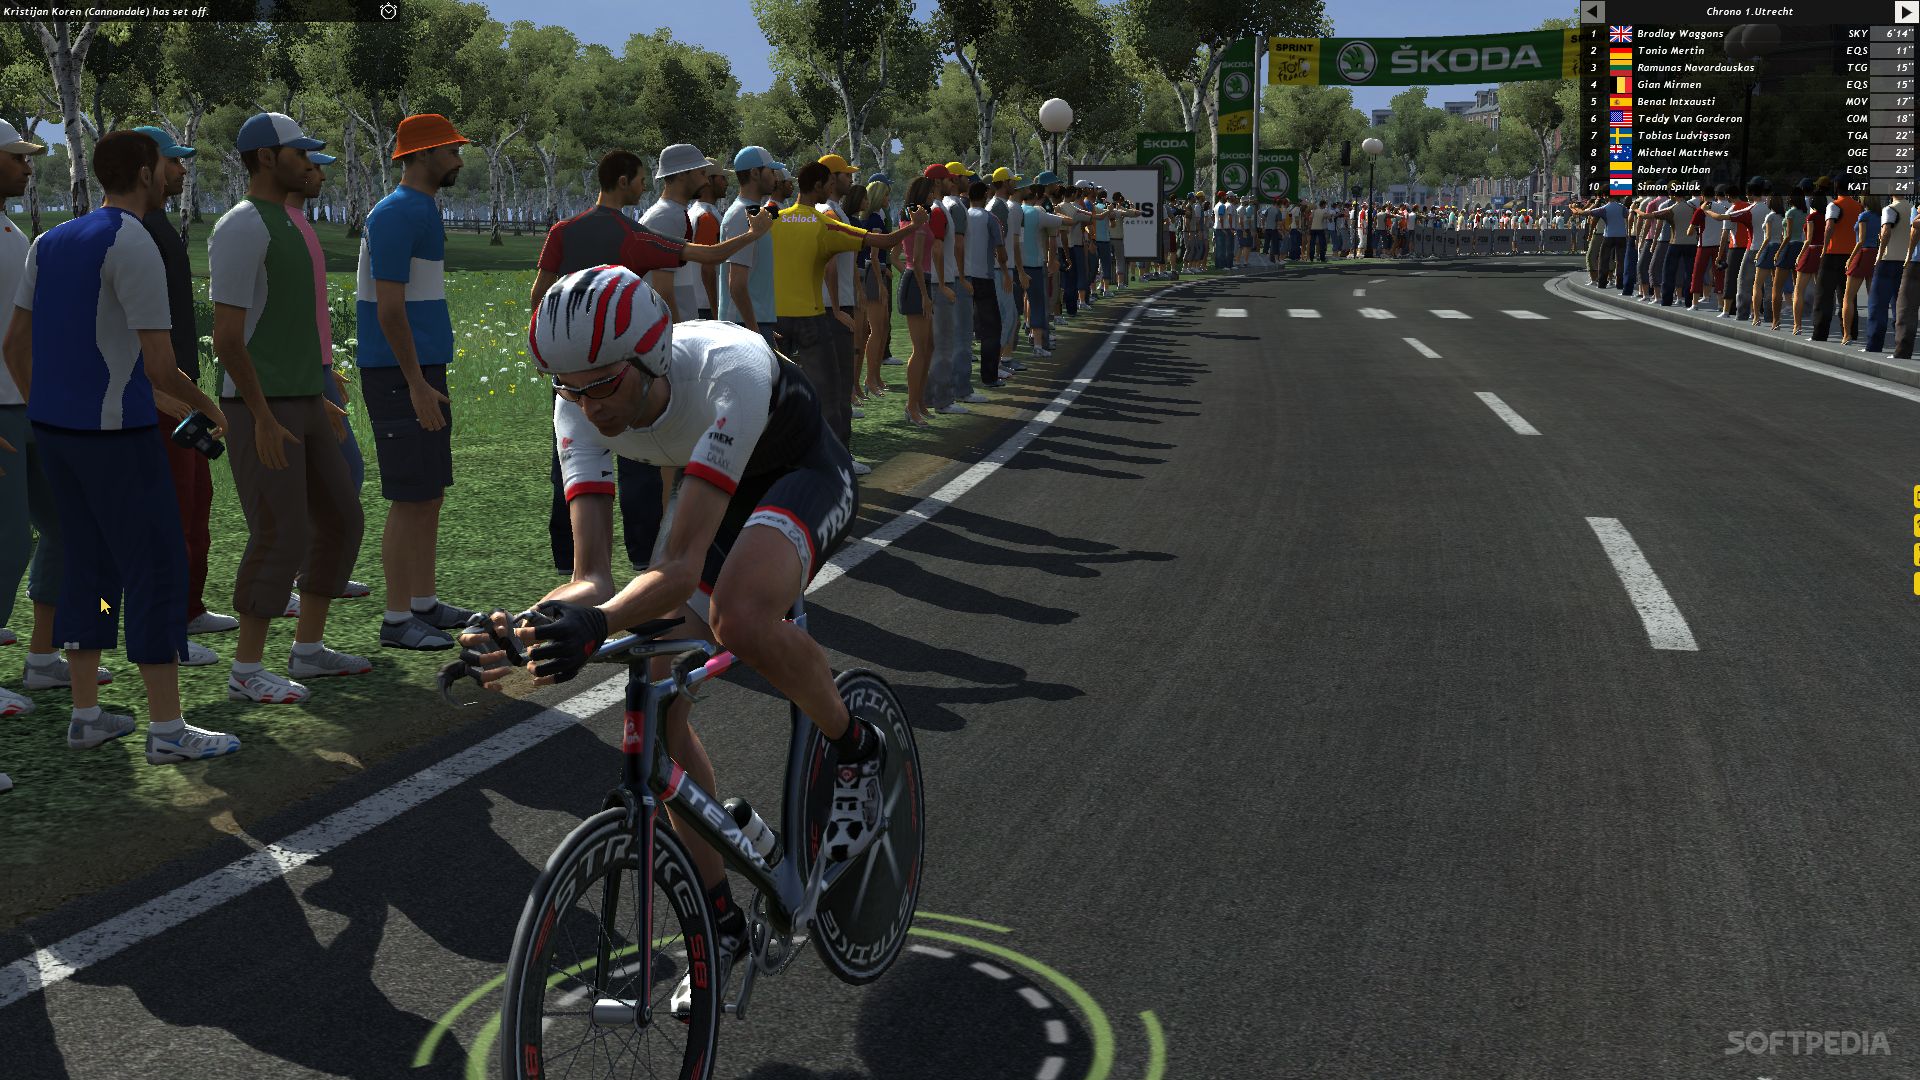 Pro Cycling Manager 2020 Review: The management sim cycling fans need -  MSPoweruser